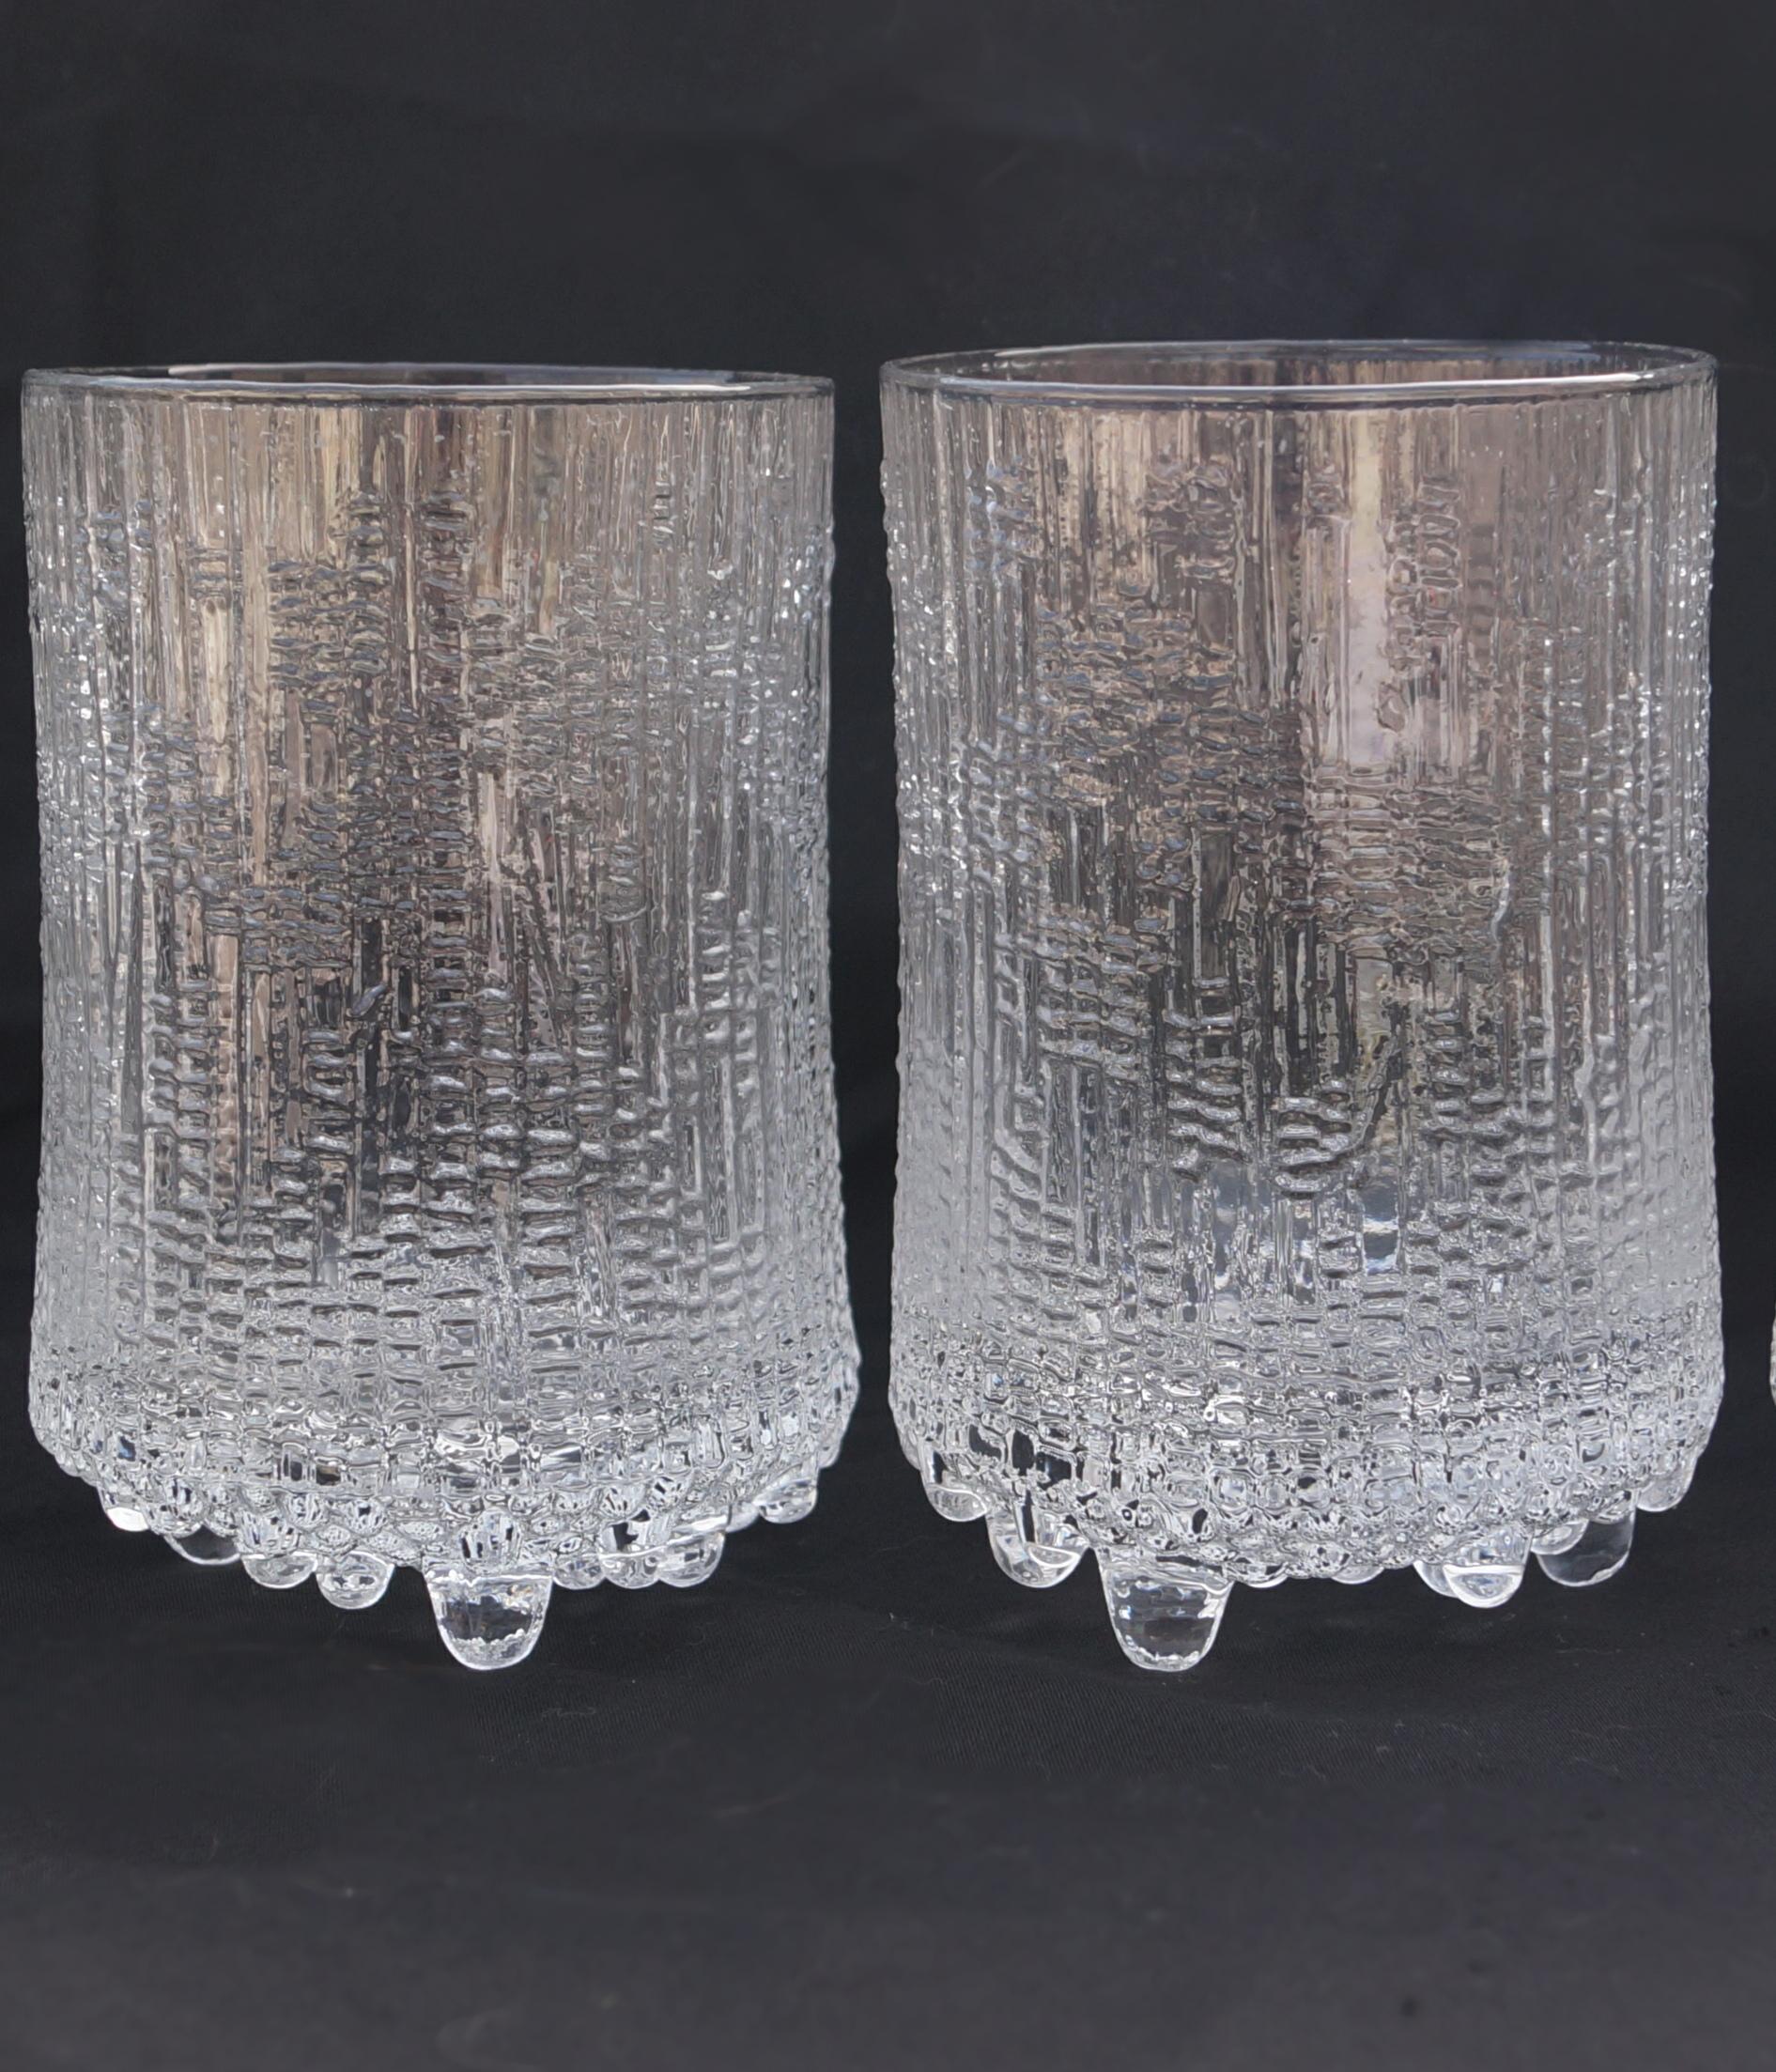 Set of 8 Tapio Wirkkala Ultima Thule Glass Highball Glasses Finland  3 Toed In Good Condition For Sale In Wayne, NJ